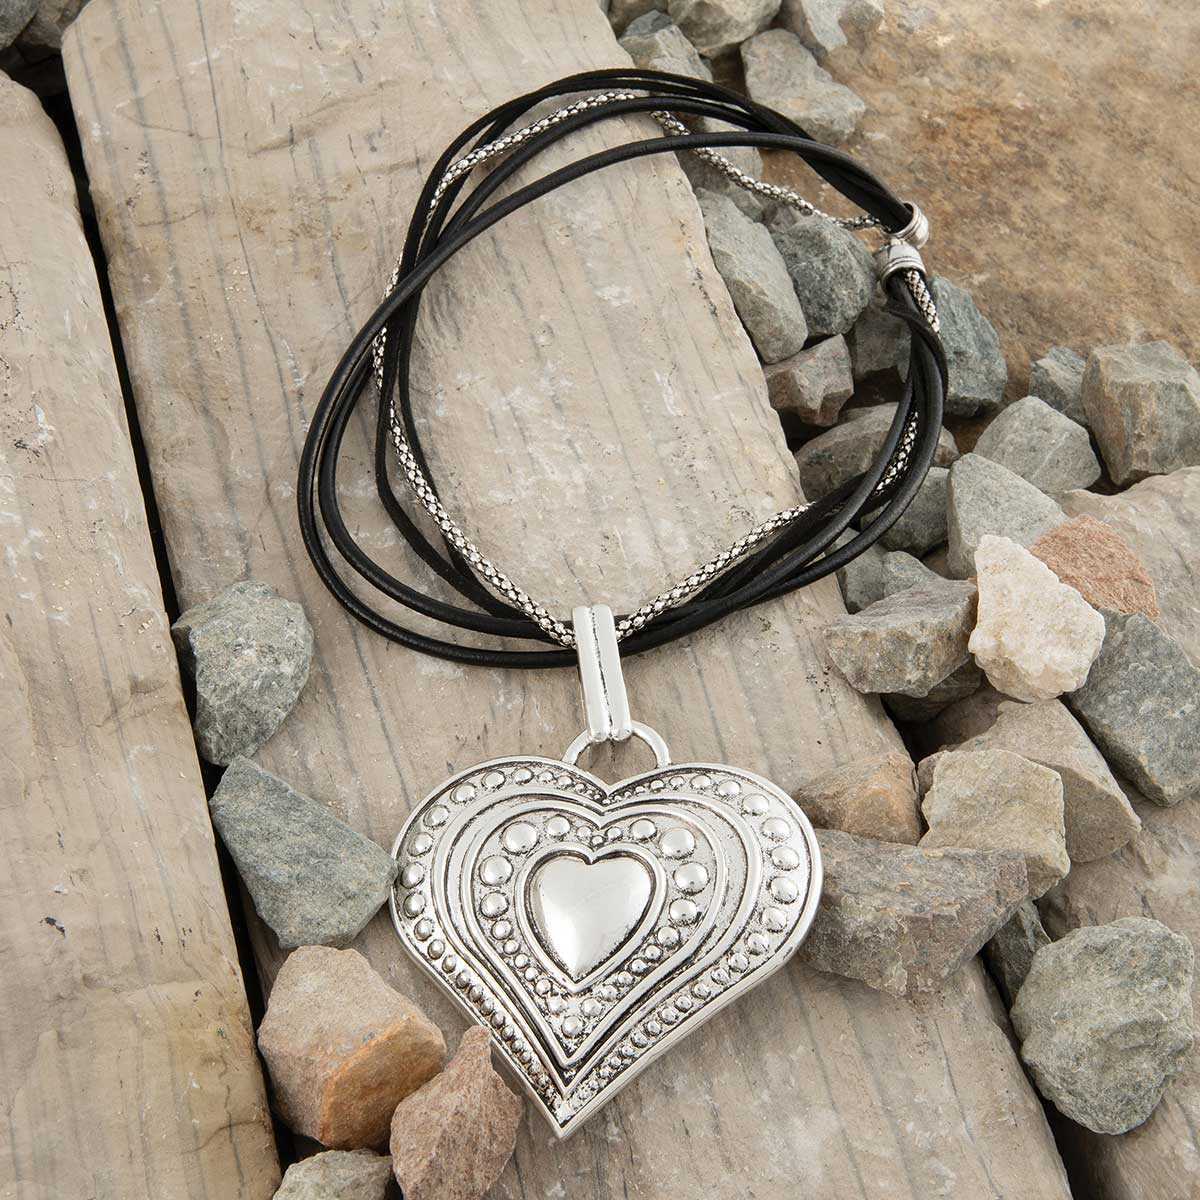 b50 NECKLACE HEART CORDS/CHAINS 18IN-20IN